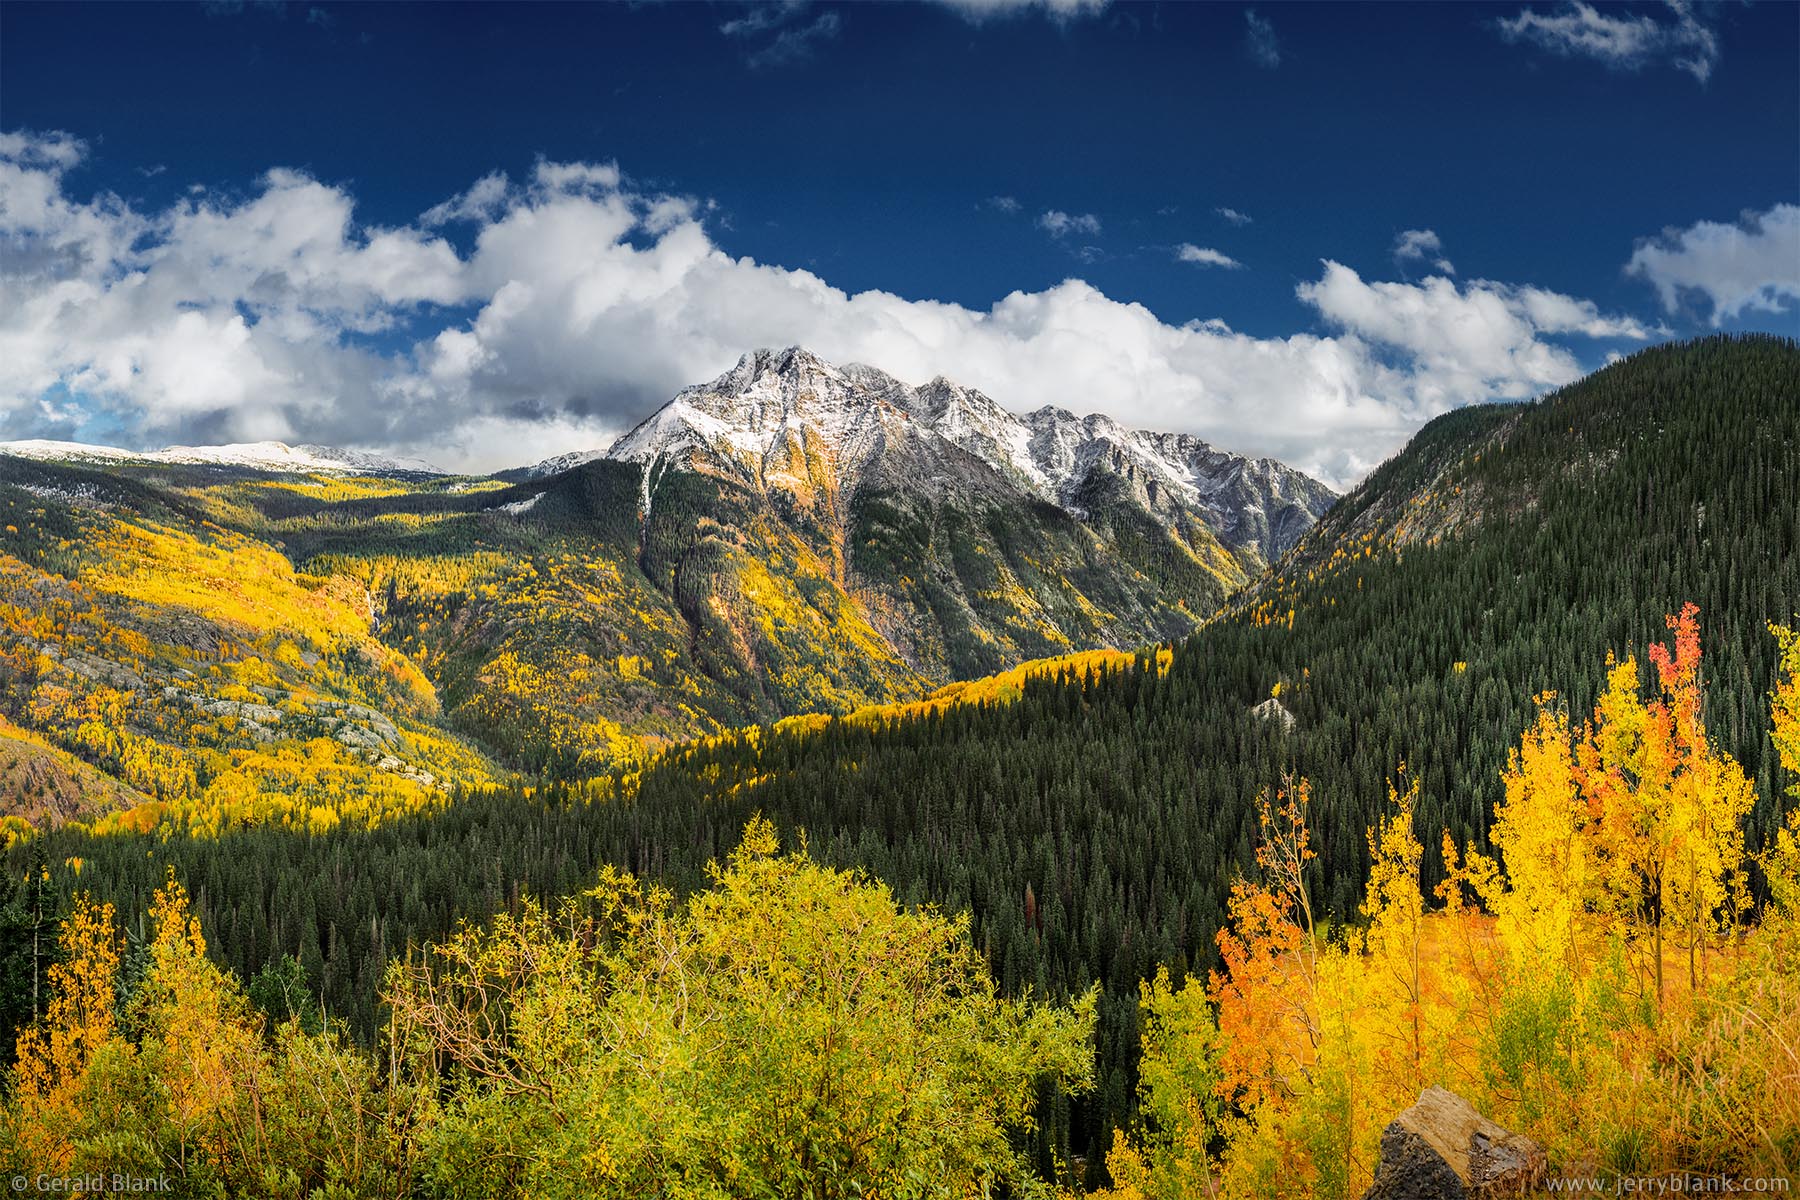 #52266 - The Twilight Peaks, in Colorado’s San Juan Mountains, are surrounded by vivid autumn color in this view from Coal Bank Pass on US Highway 550